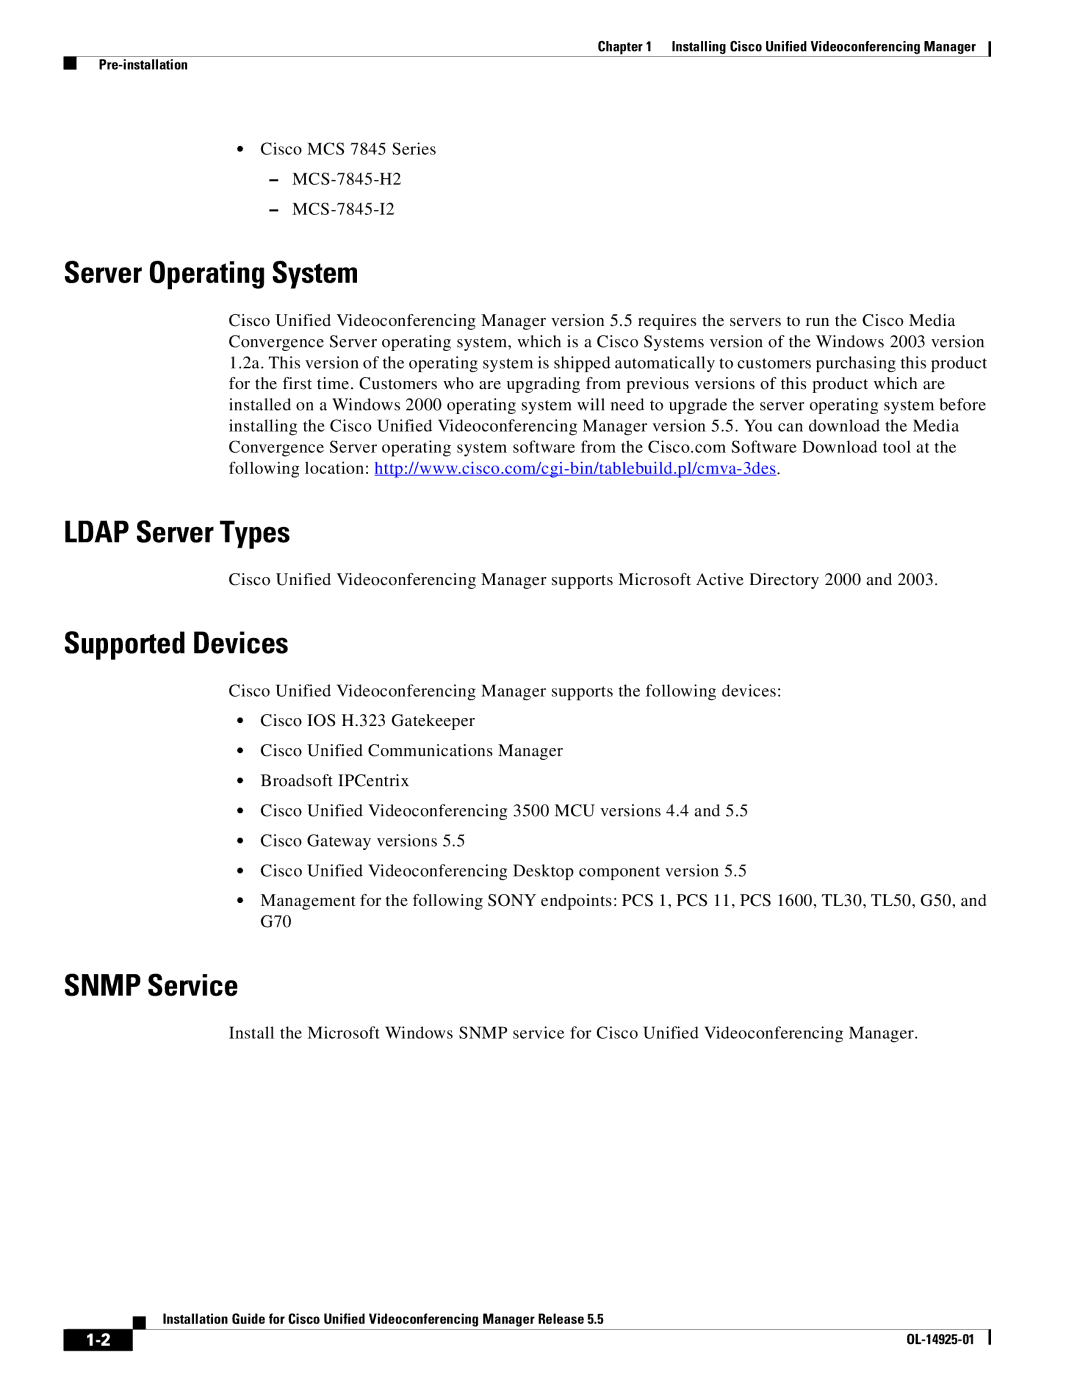 Cisco Systems MCS 7825 Series, MCS 7845 Series Server Operating System Ldap Server Types, Supported Devices, Snmp Service 